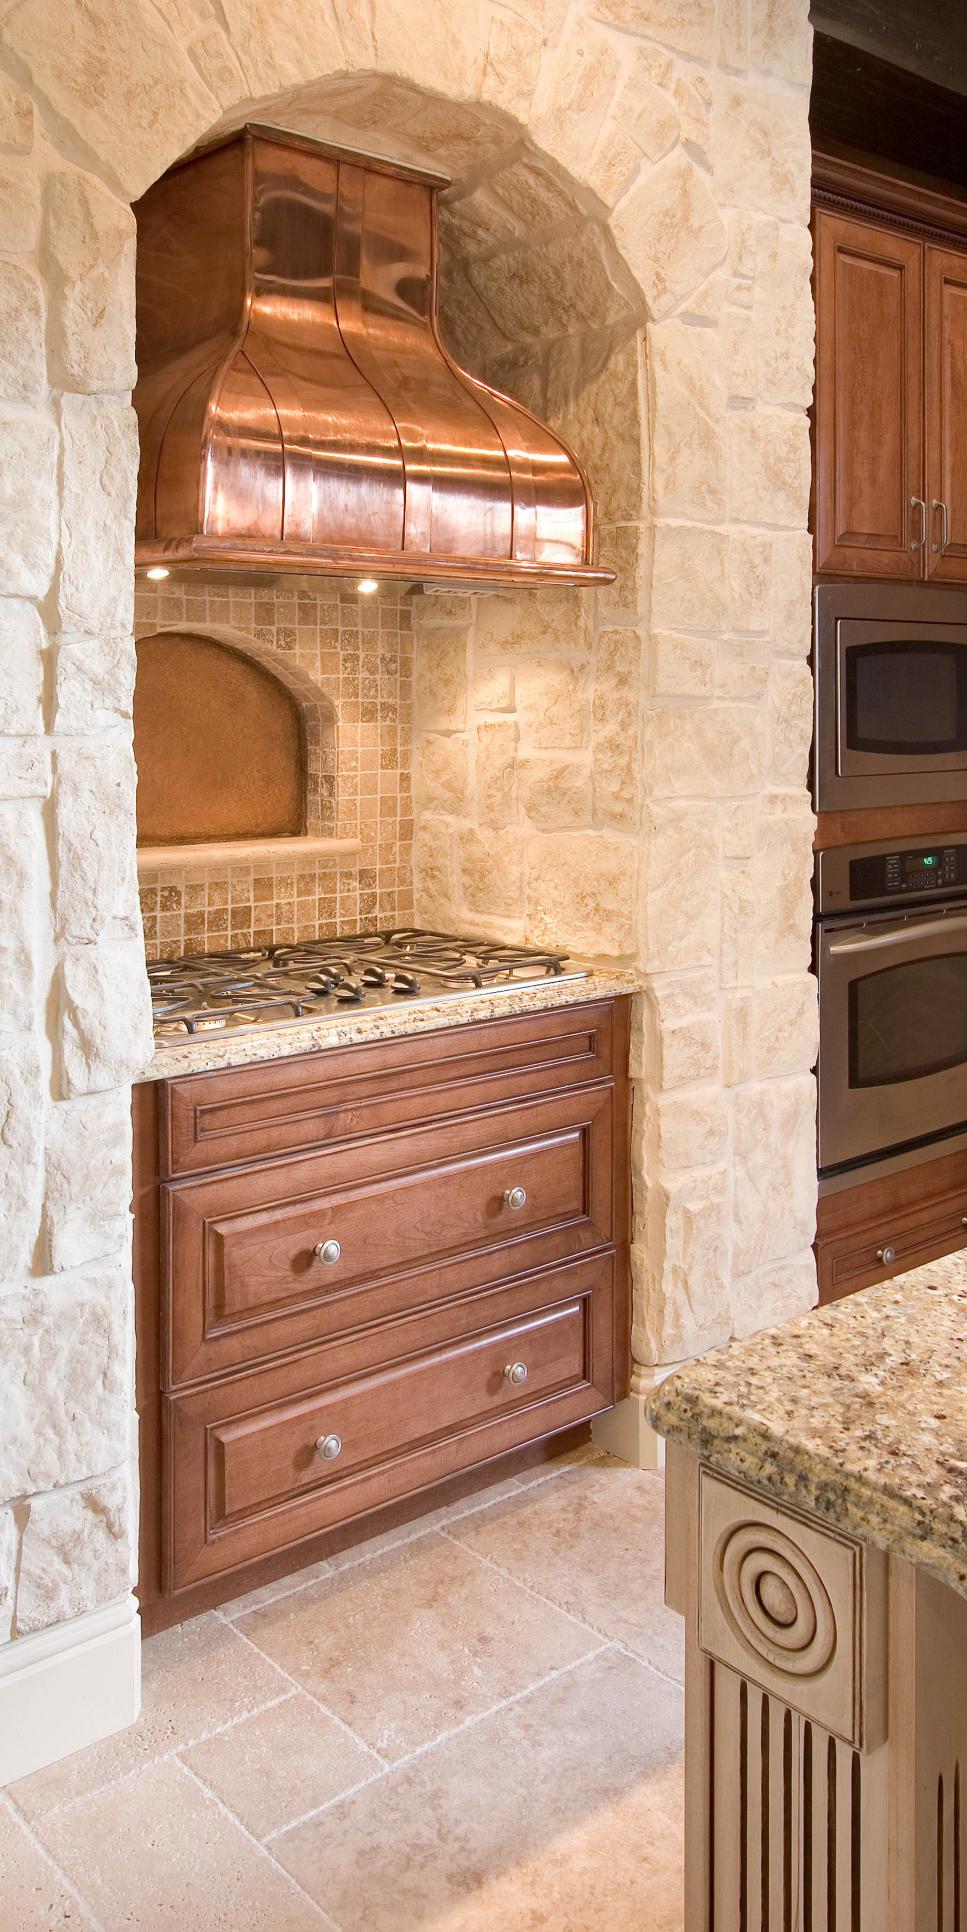 Neutral Old World Kitchen With Built-In Copper Hood in Stone Alcove